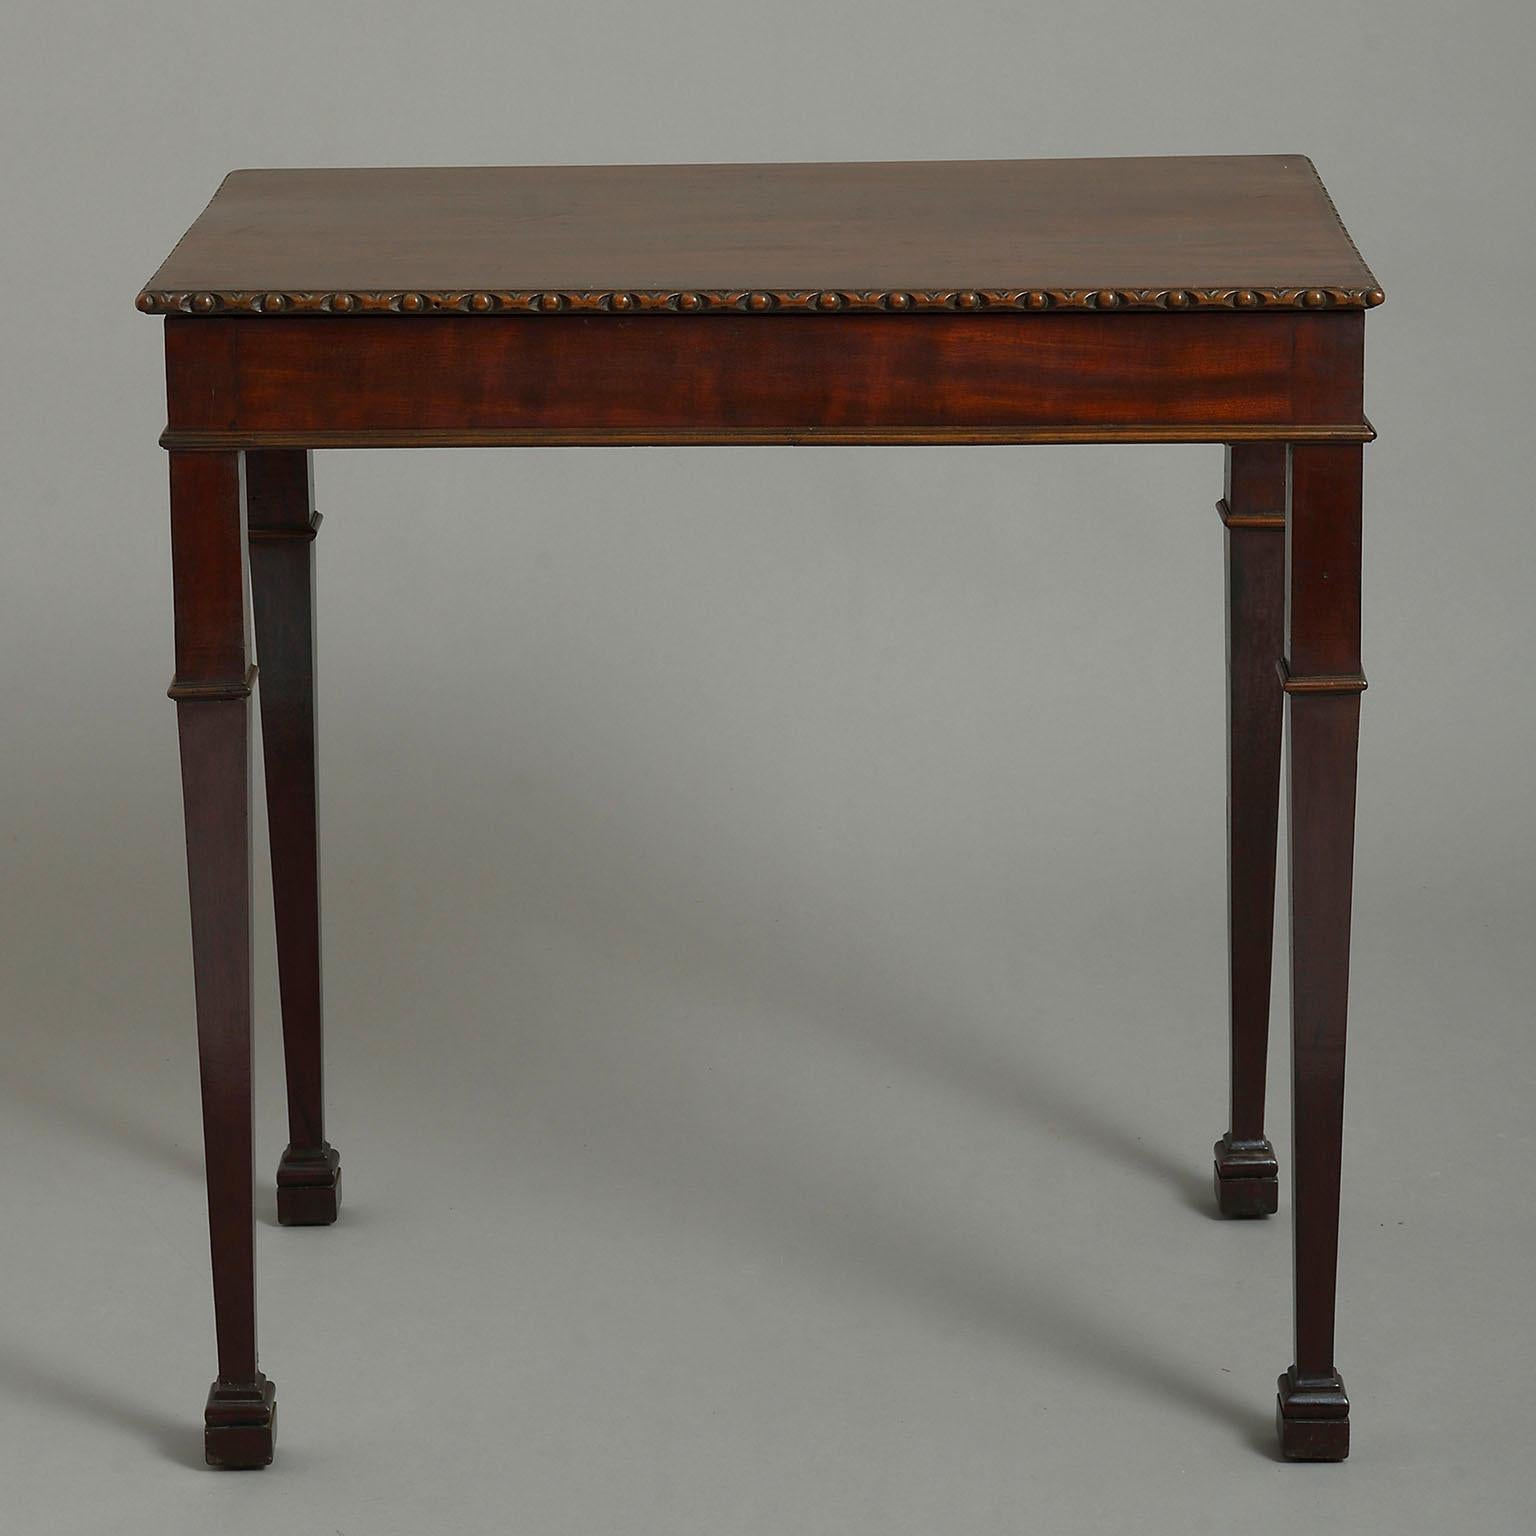 Early 20th century George III style mahogany table. A rectangular top with egg-and-dart border and with collared mouldings on the square tapering legs terminating in moulded block feet.